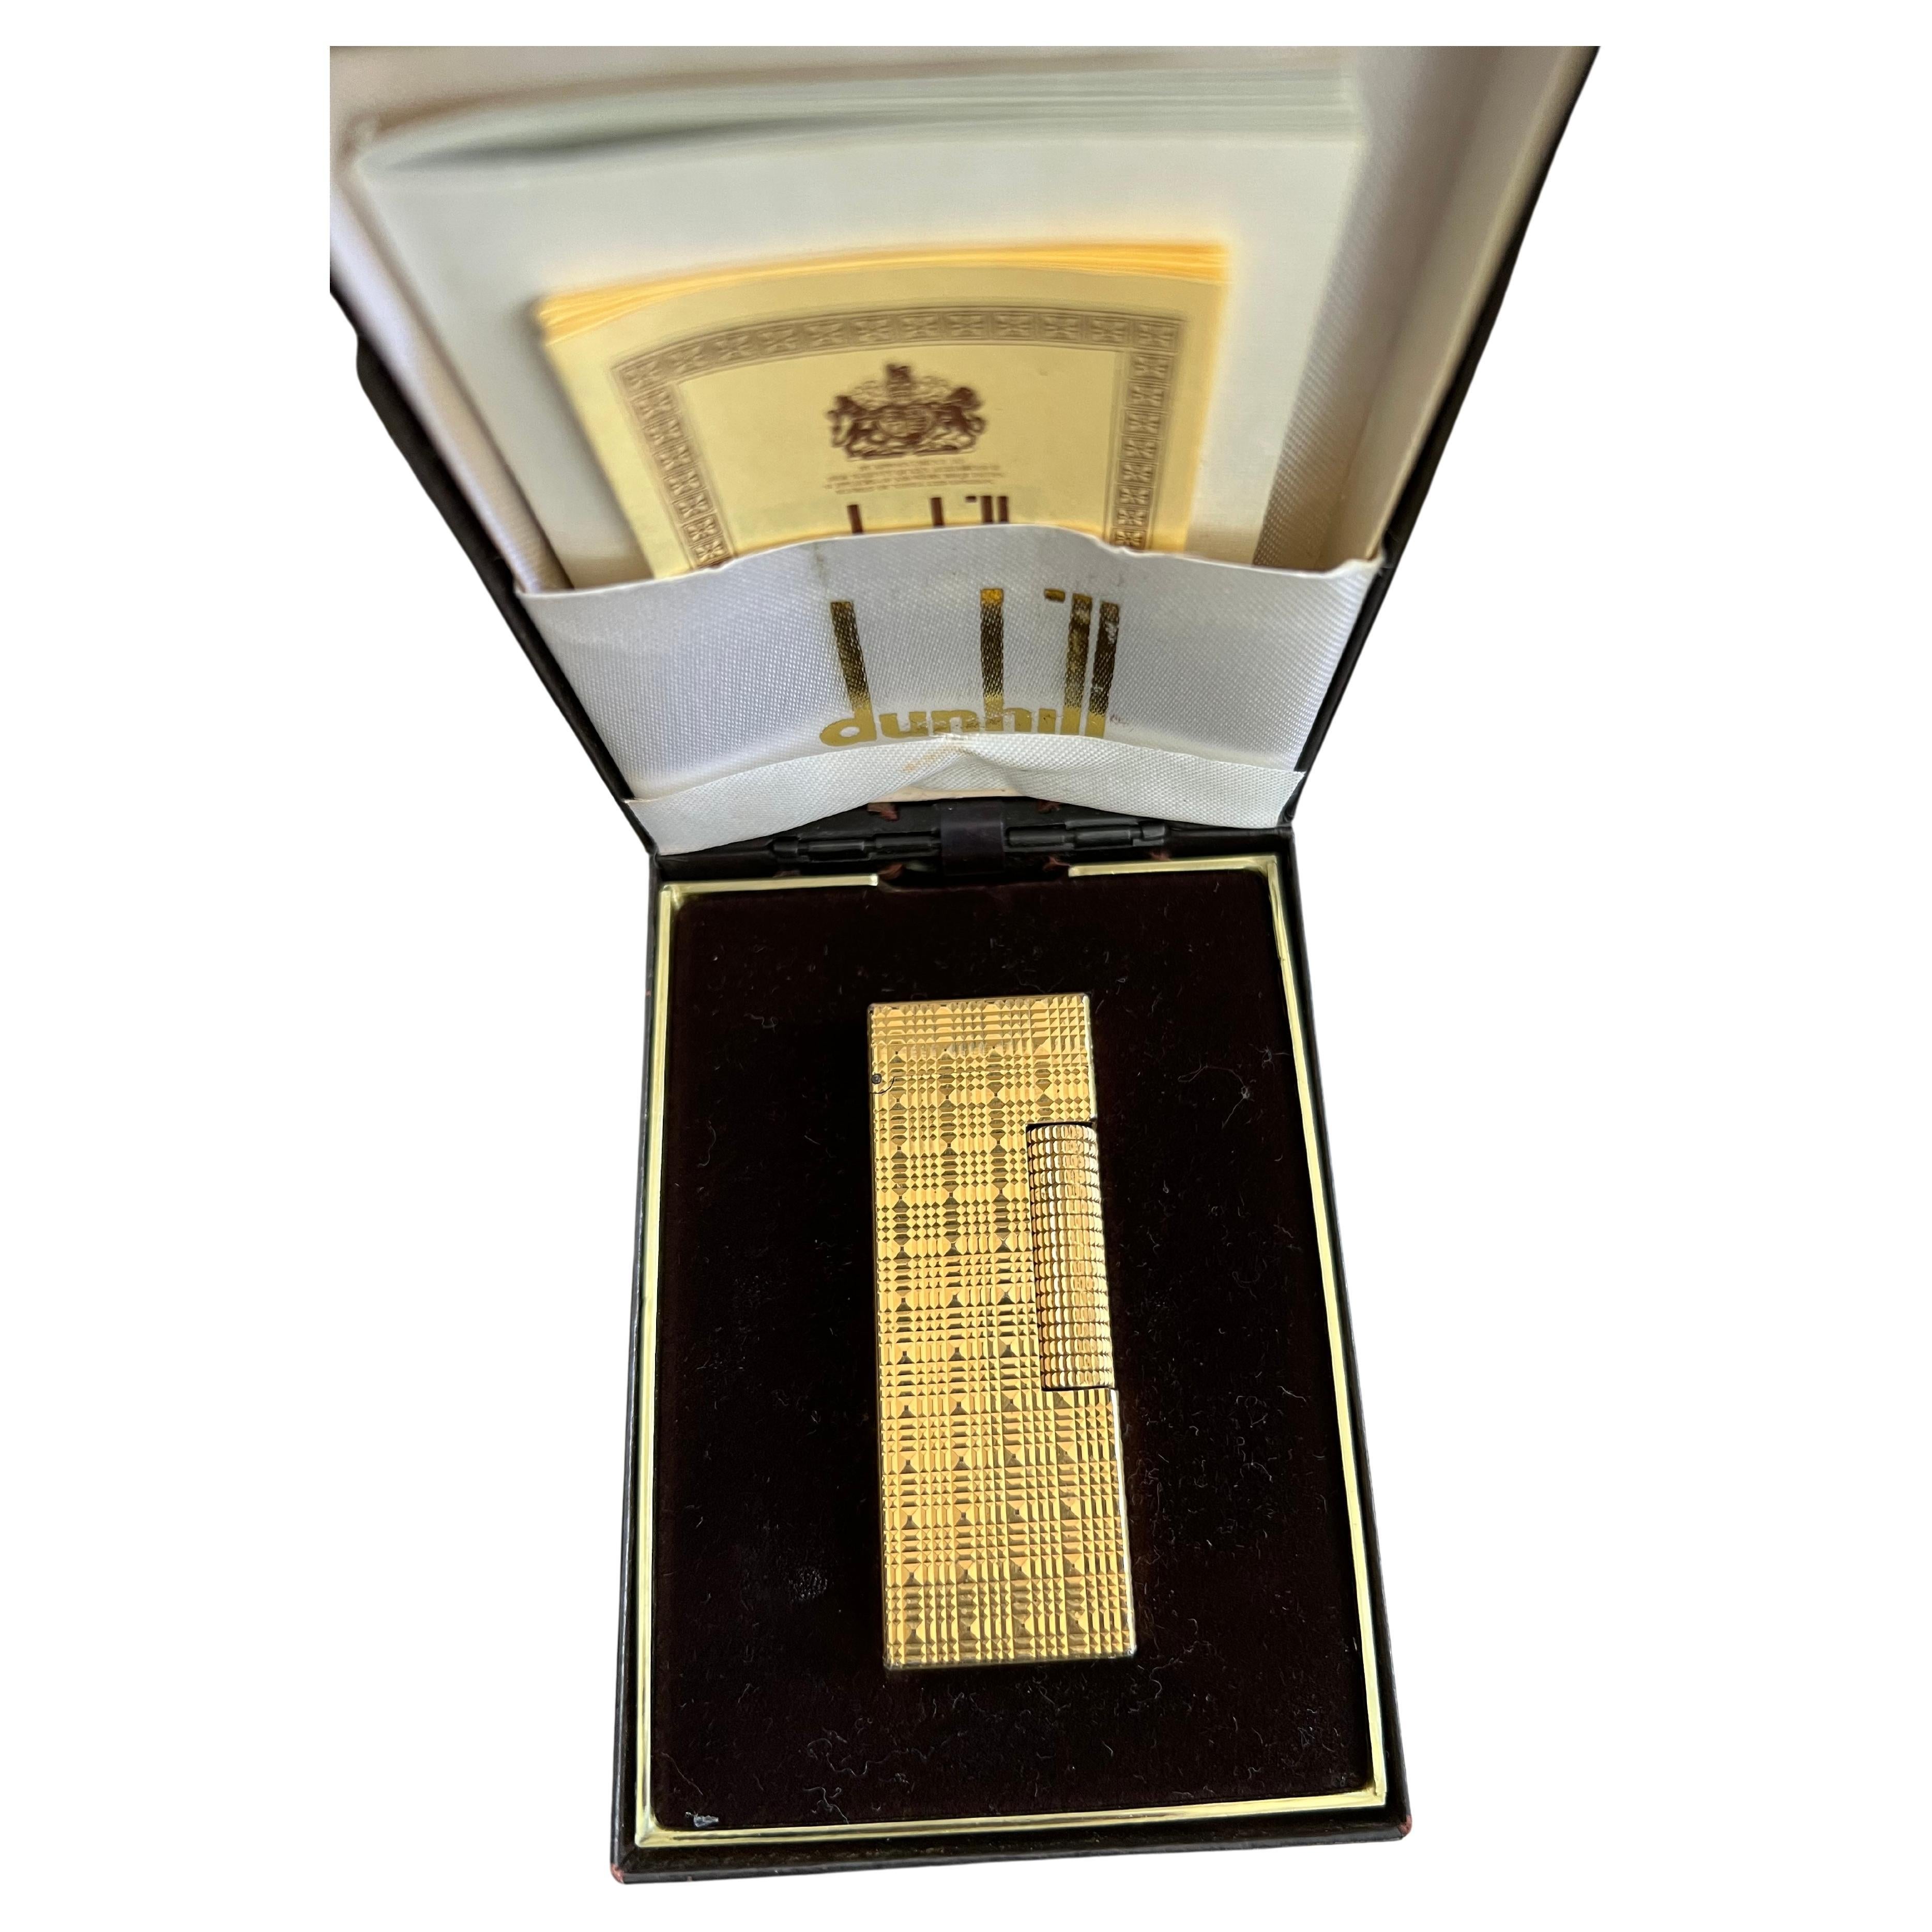 A Dunhill gold-plated mid century cigarette lighter, barley engine turned design.
Iconic and beautifully engineered piece rare lacquer condition.
Mid-Century Modern Lighter by Dunhill Rollagas Rulerlite, c1970 in mint condition.  
Comes with the